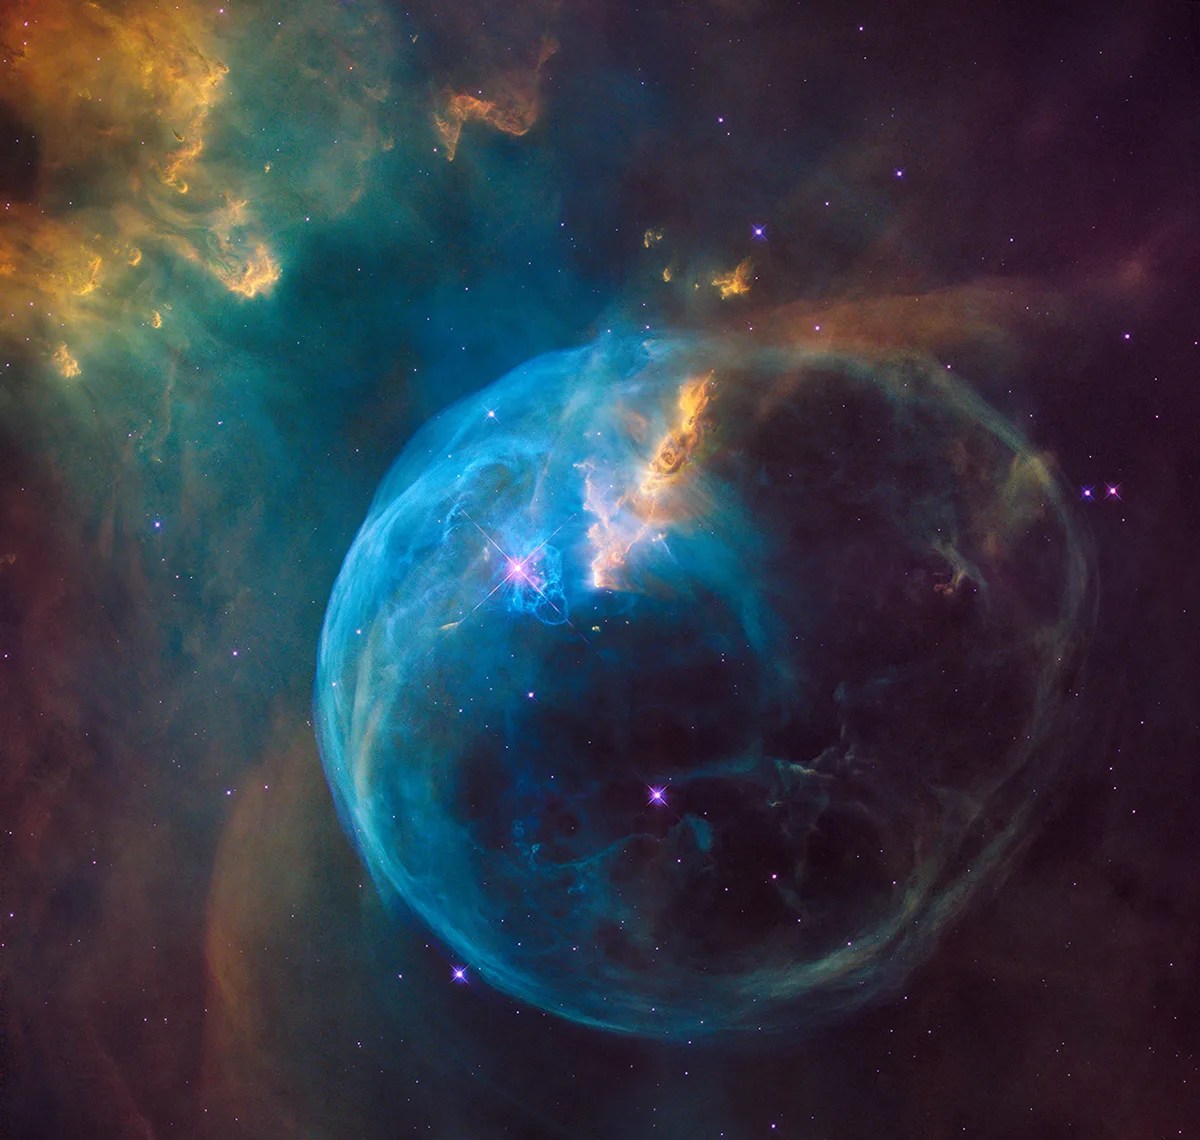 A bubble of blueish gas expands in the lower center of the image. Gas and dust in yellow, green, and brown hues fills the rest of the image.